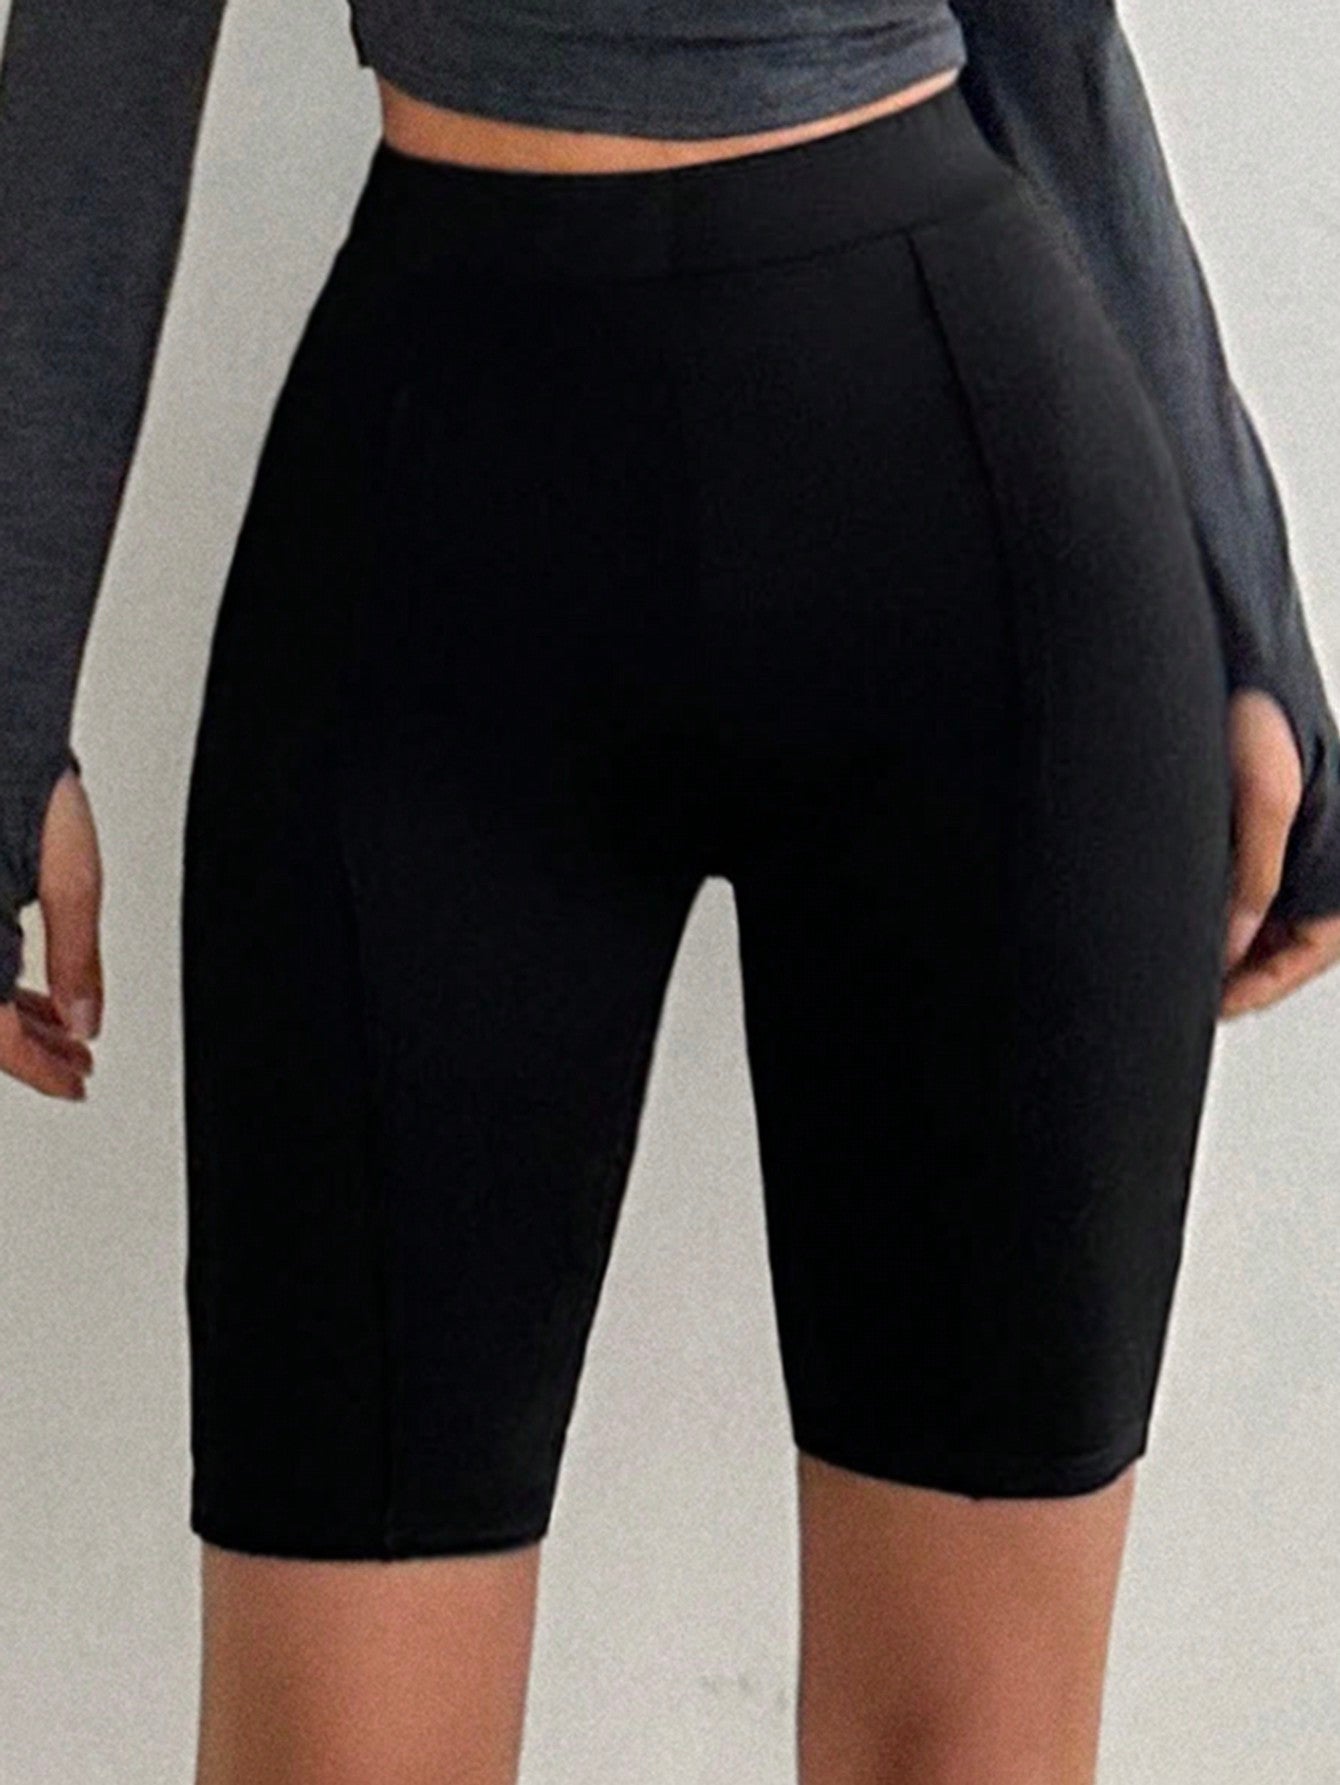 Women's Solid Color Basic Leggings, Suitable For Daily Wear